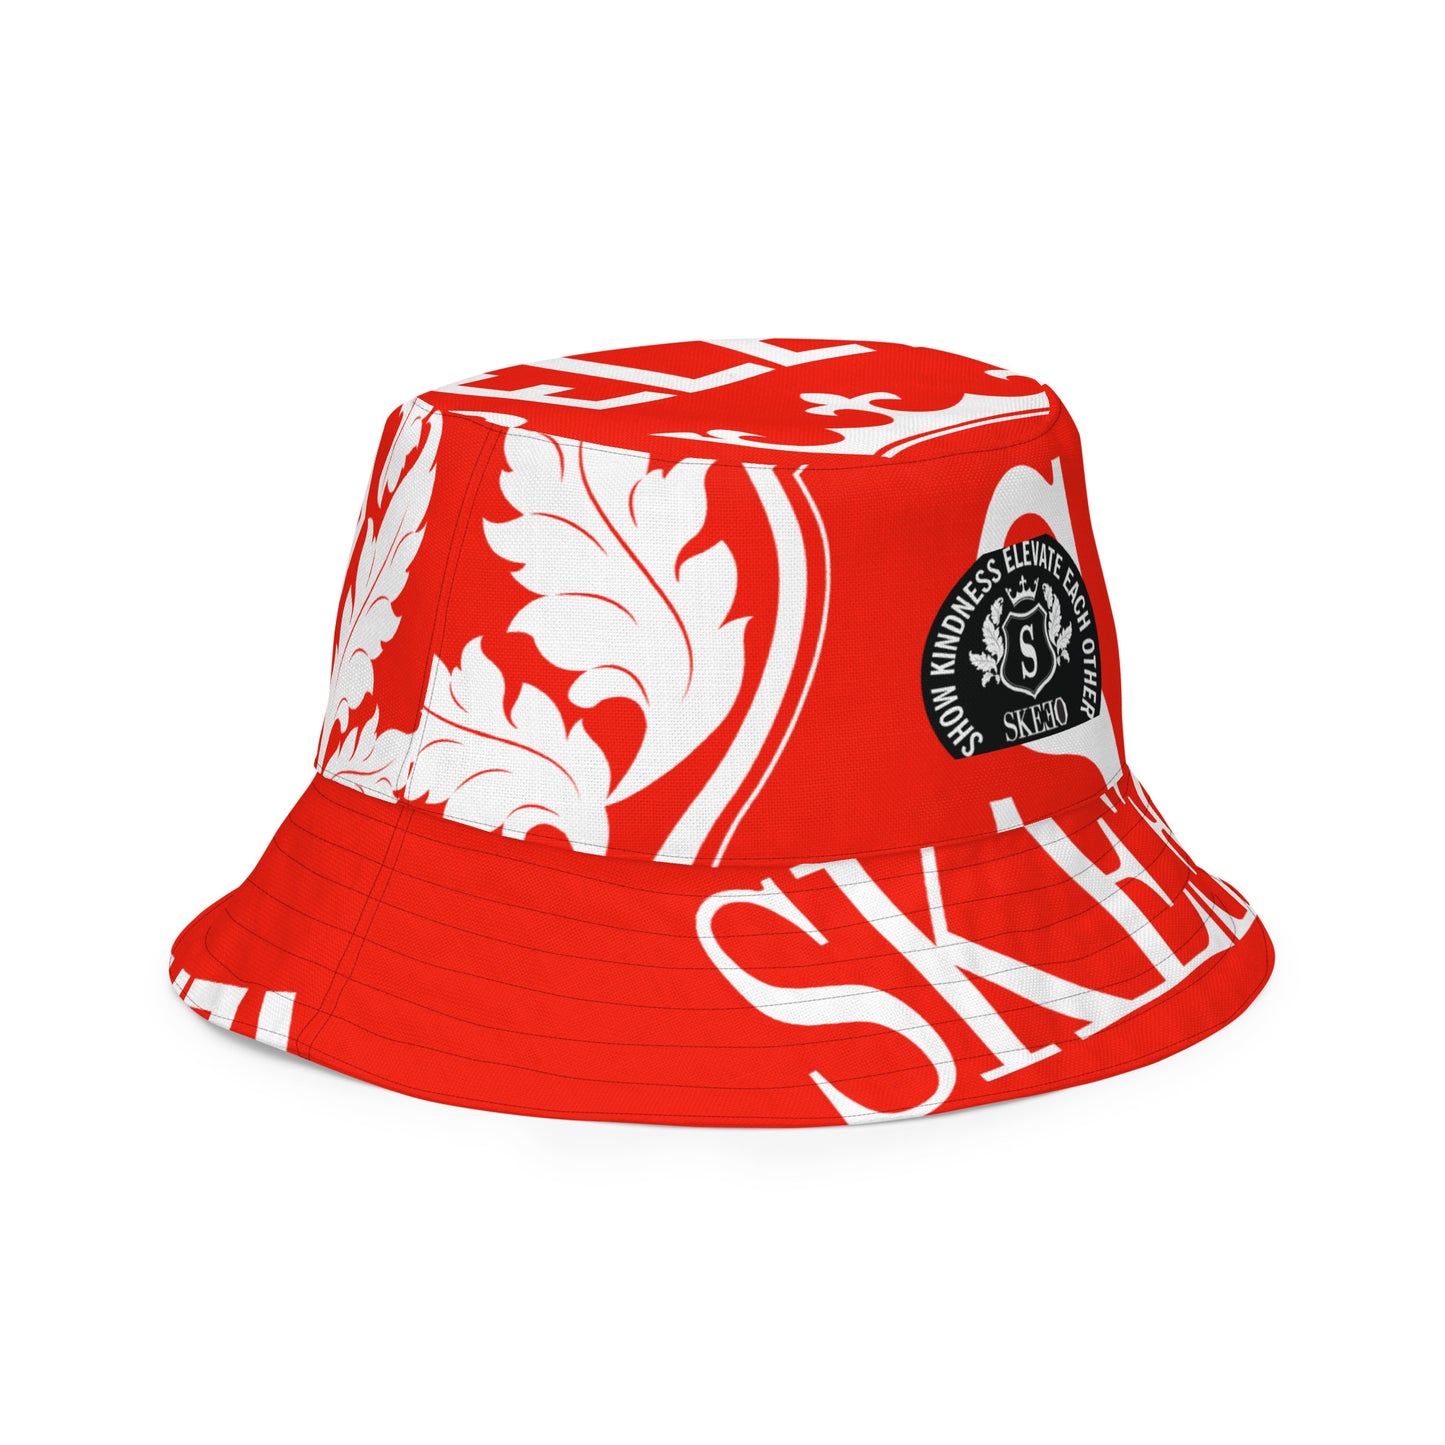 1 ASK White/Red Reversible bucket hat